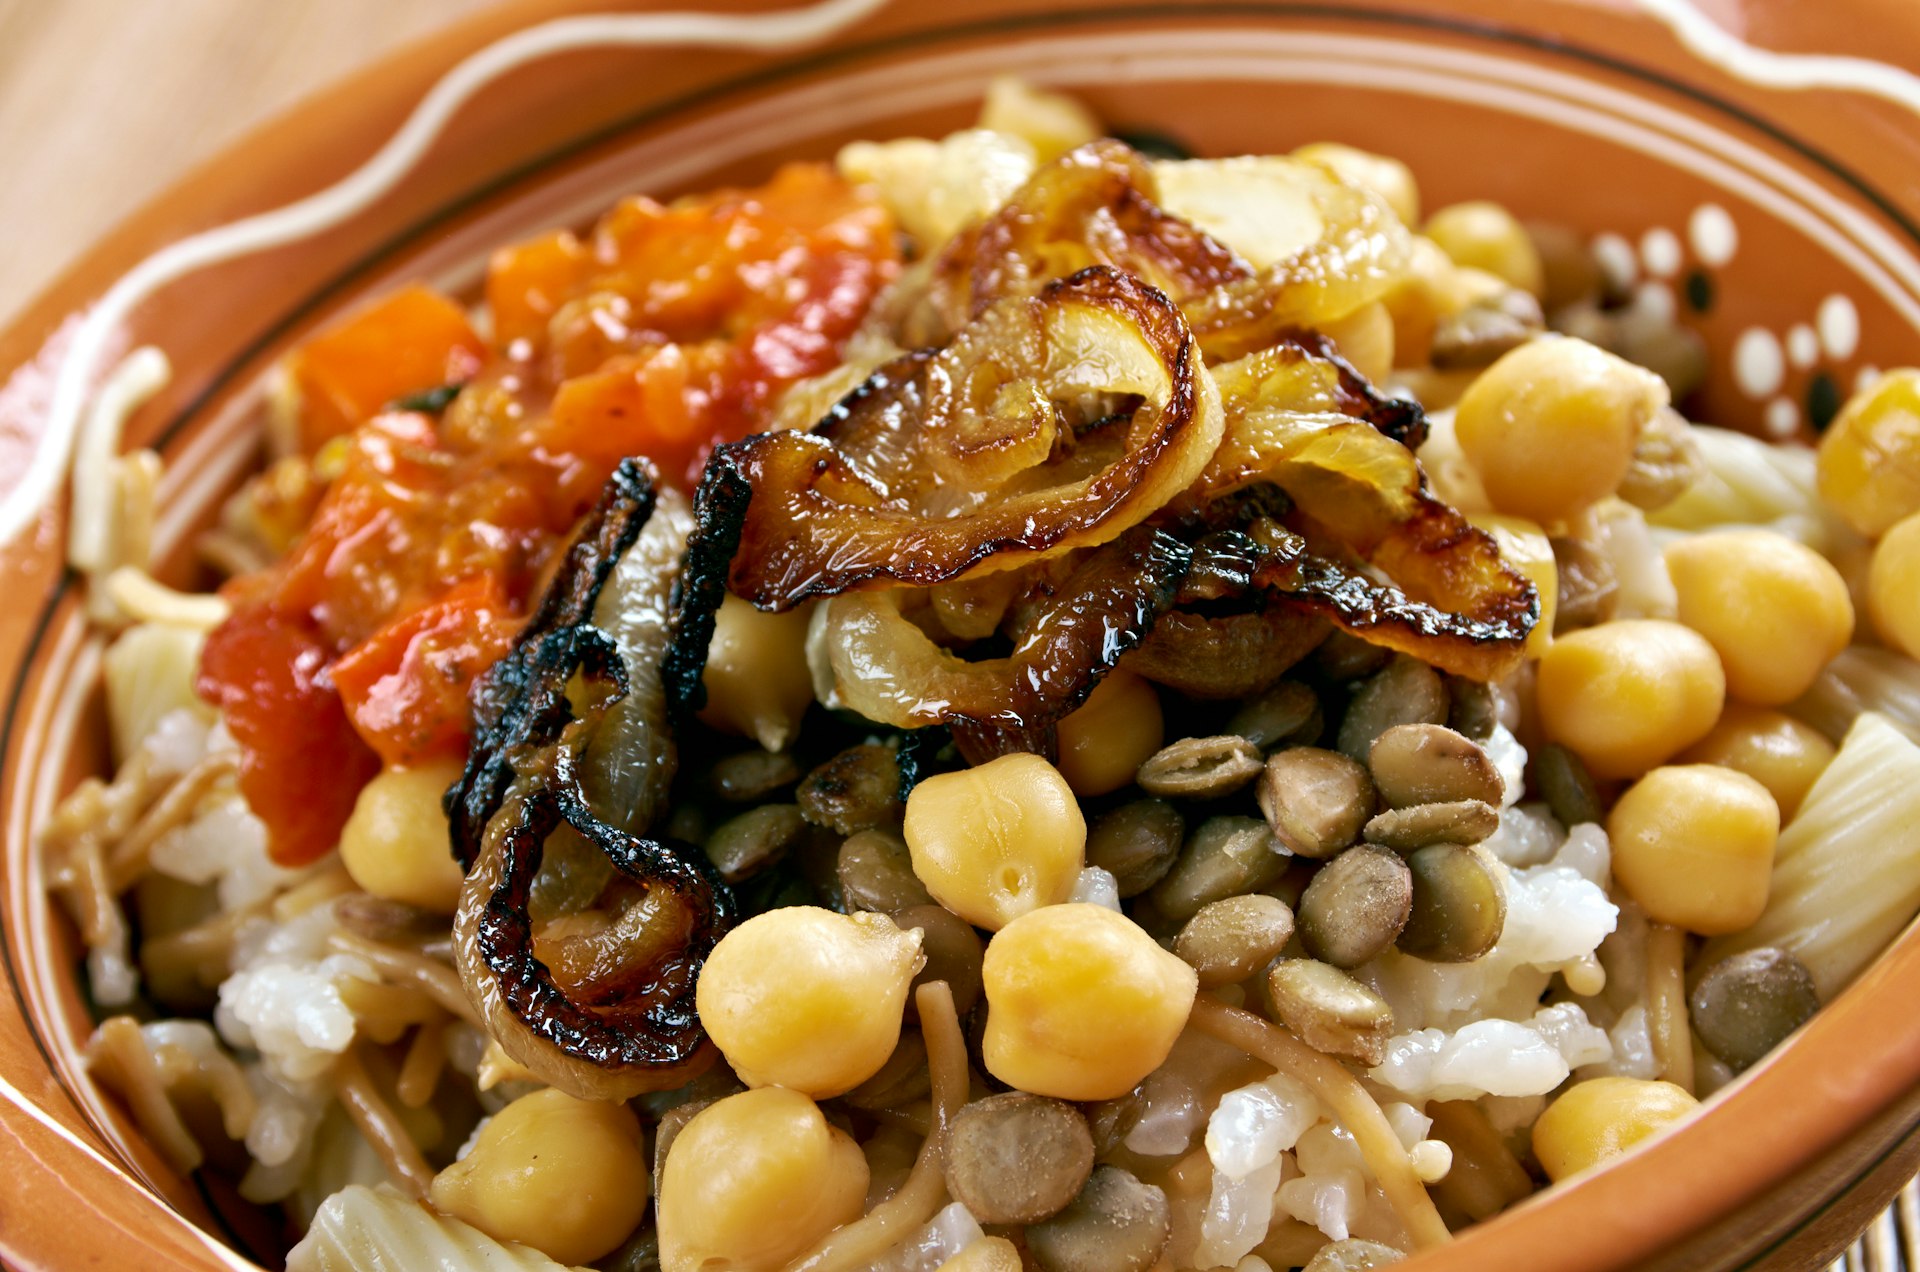 A very close-up view of a bowl of Kushari - an Egyptian dish of rice, macaroni and lentils mixed together, topped with a tomato-vinegar sauce; some add short pieces of spaghetti garnished with chickpeas and crispy fried onions.